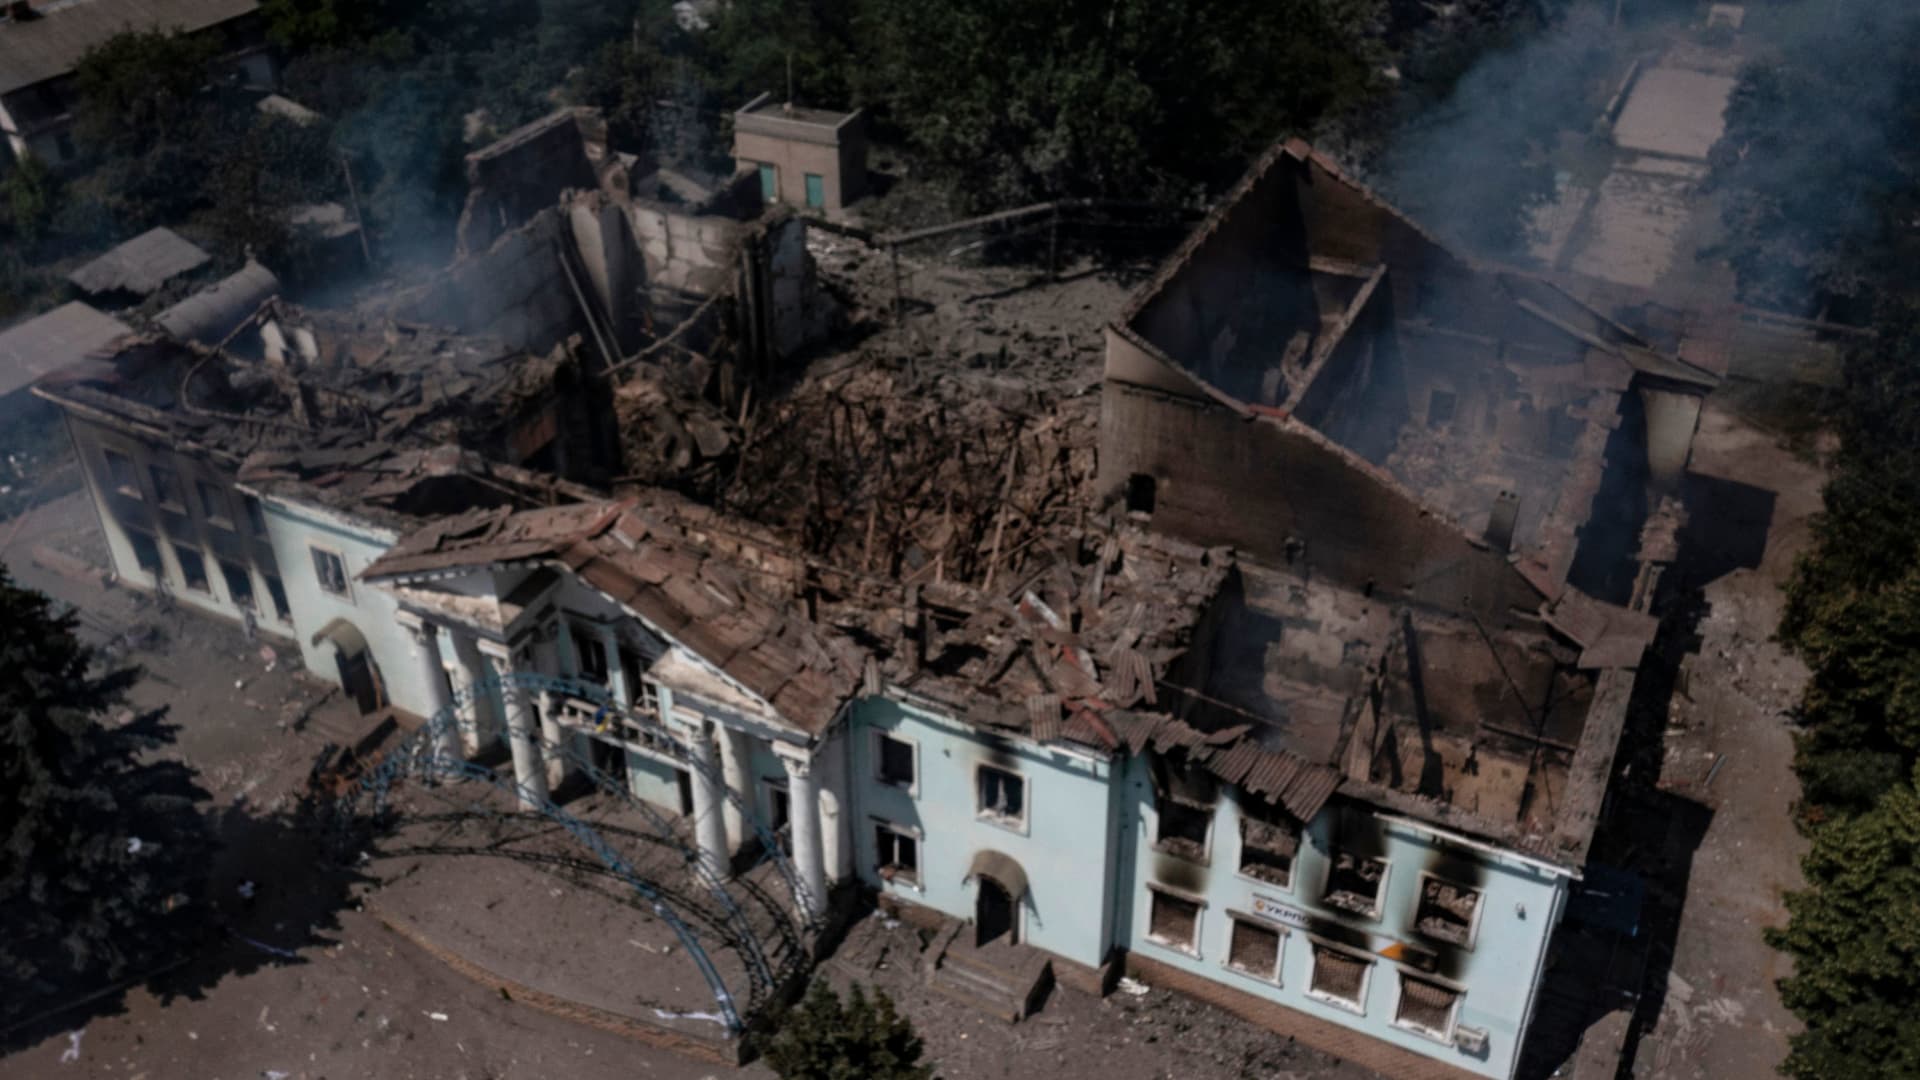 A destroyed Community Art Center in the wake of a strike in the city of Lysychansk in the Donbas on June 17, 2022.